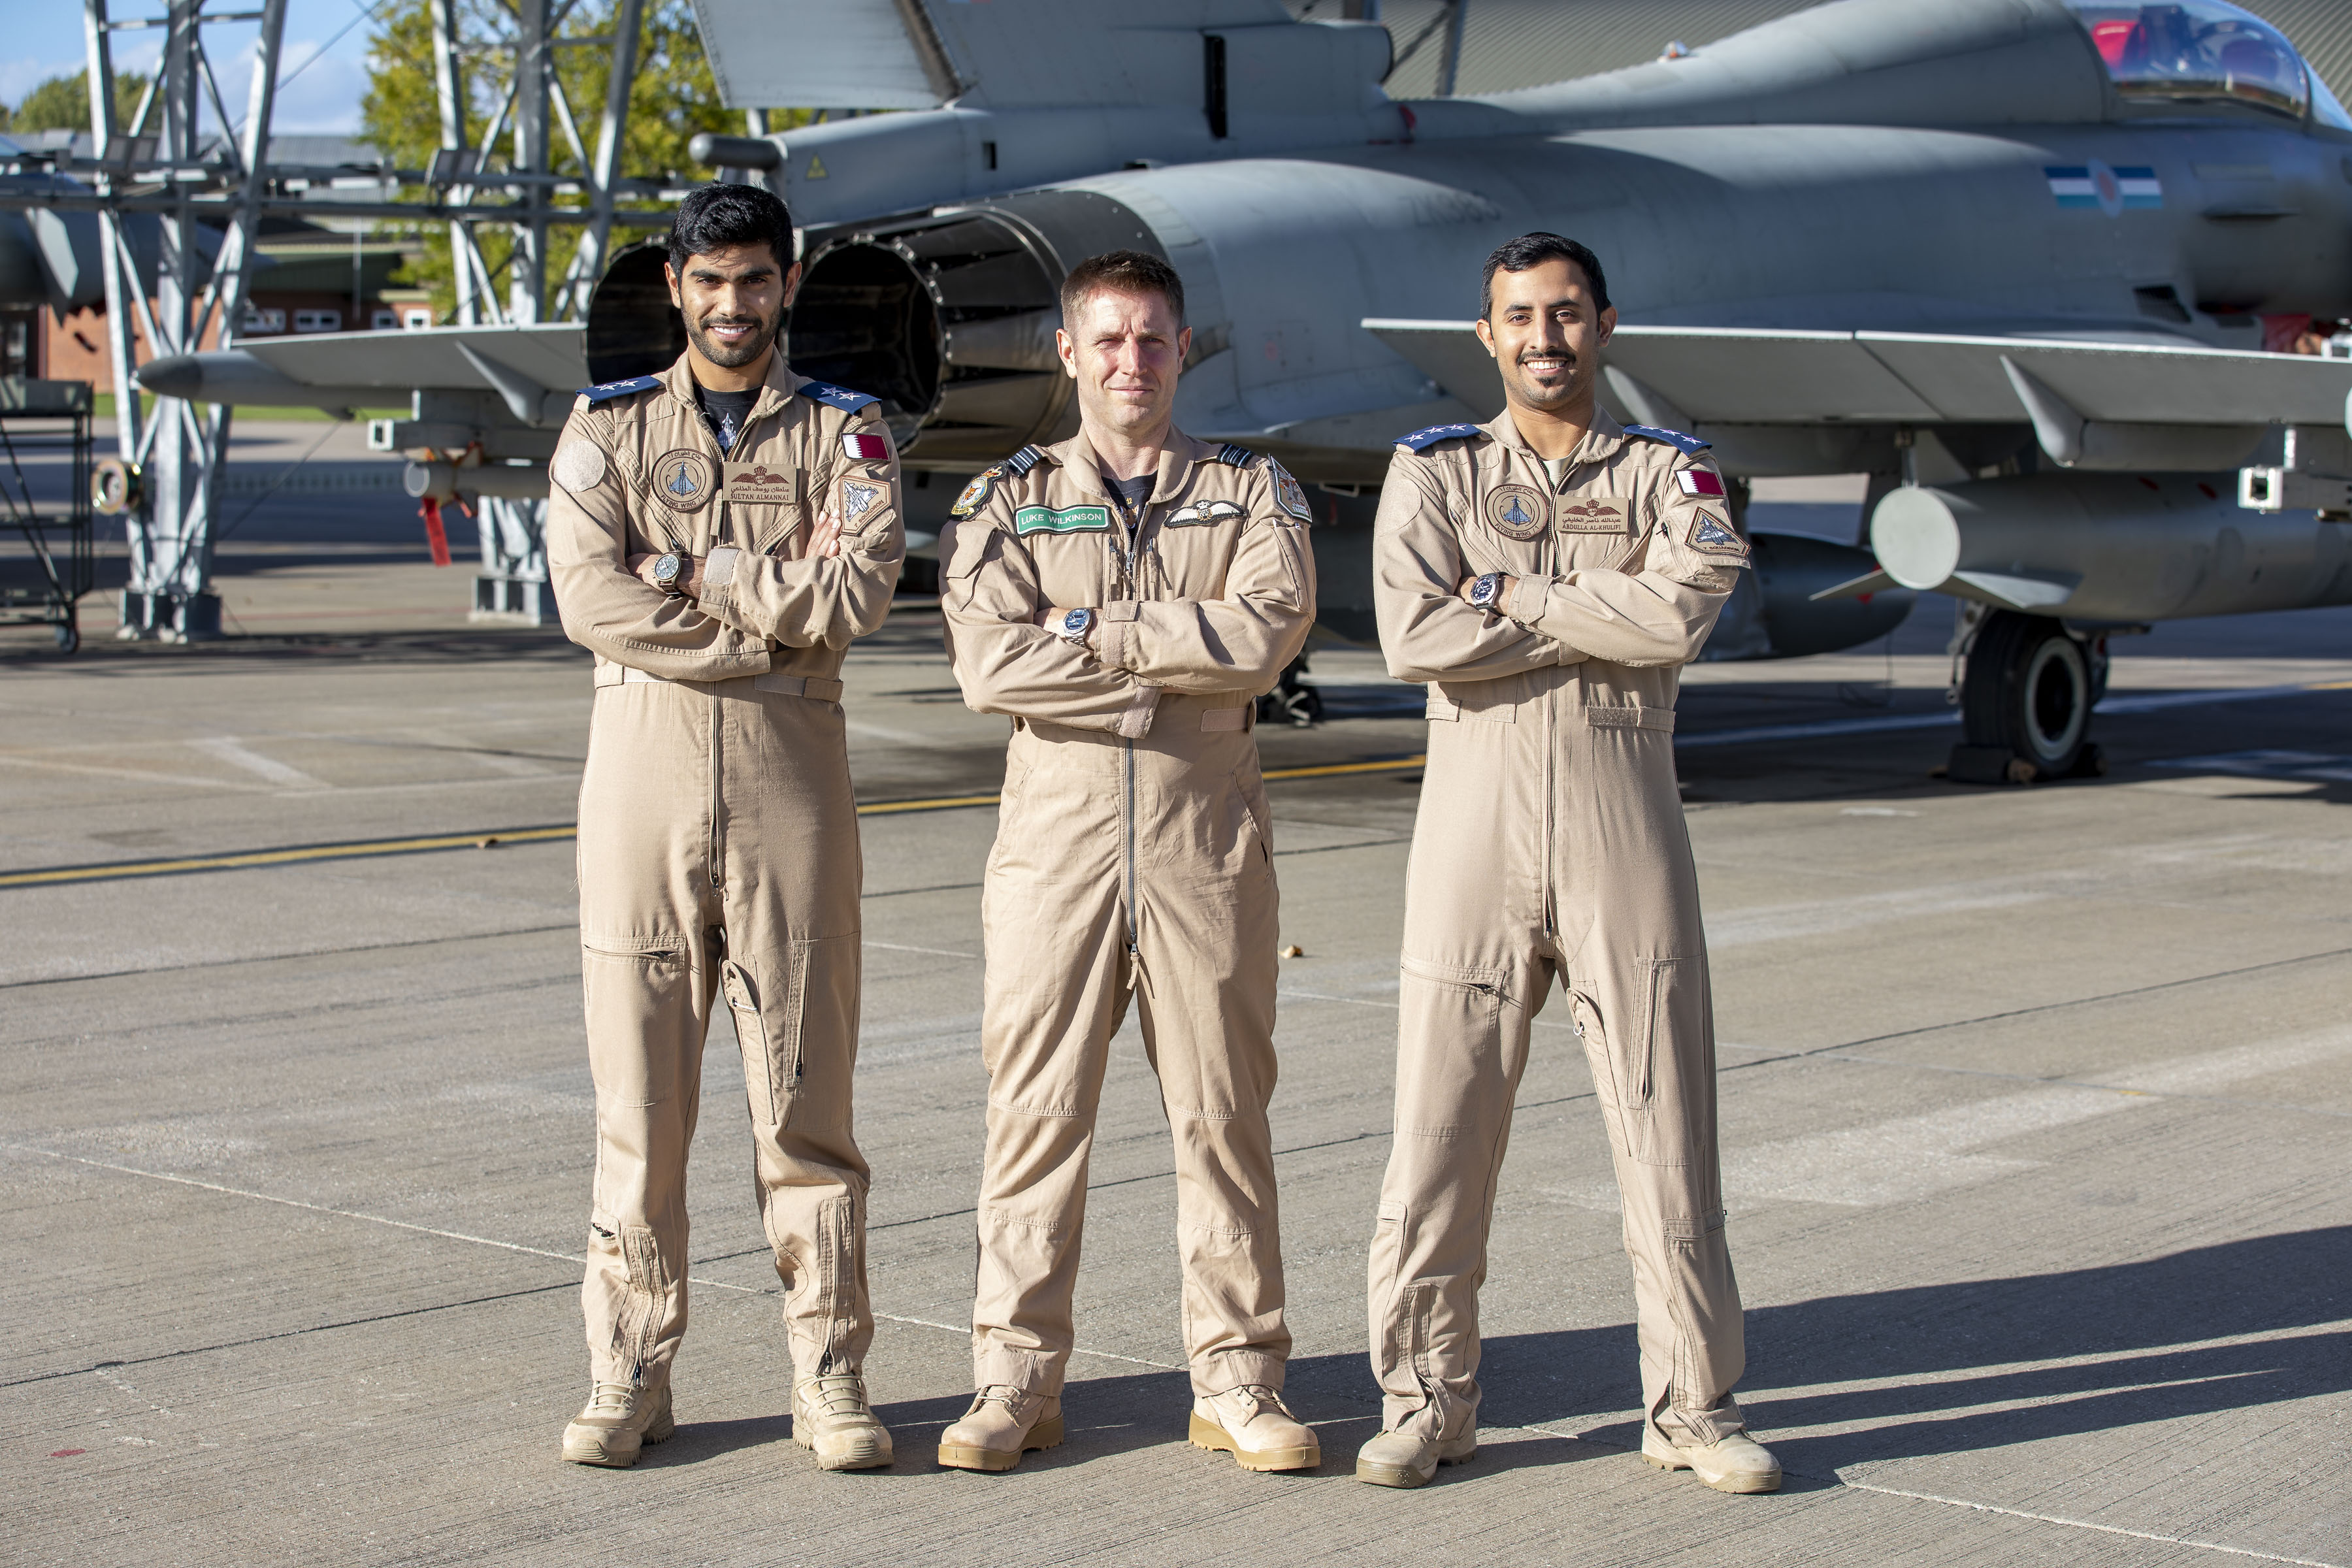 Image shows personnel on the airfield with fighter jets.